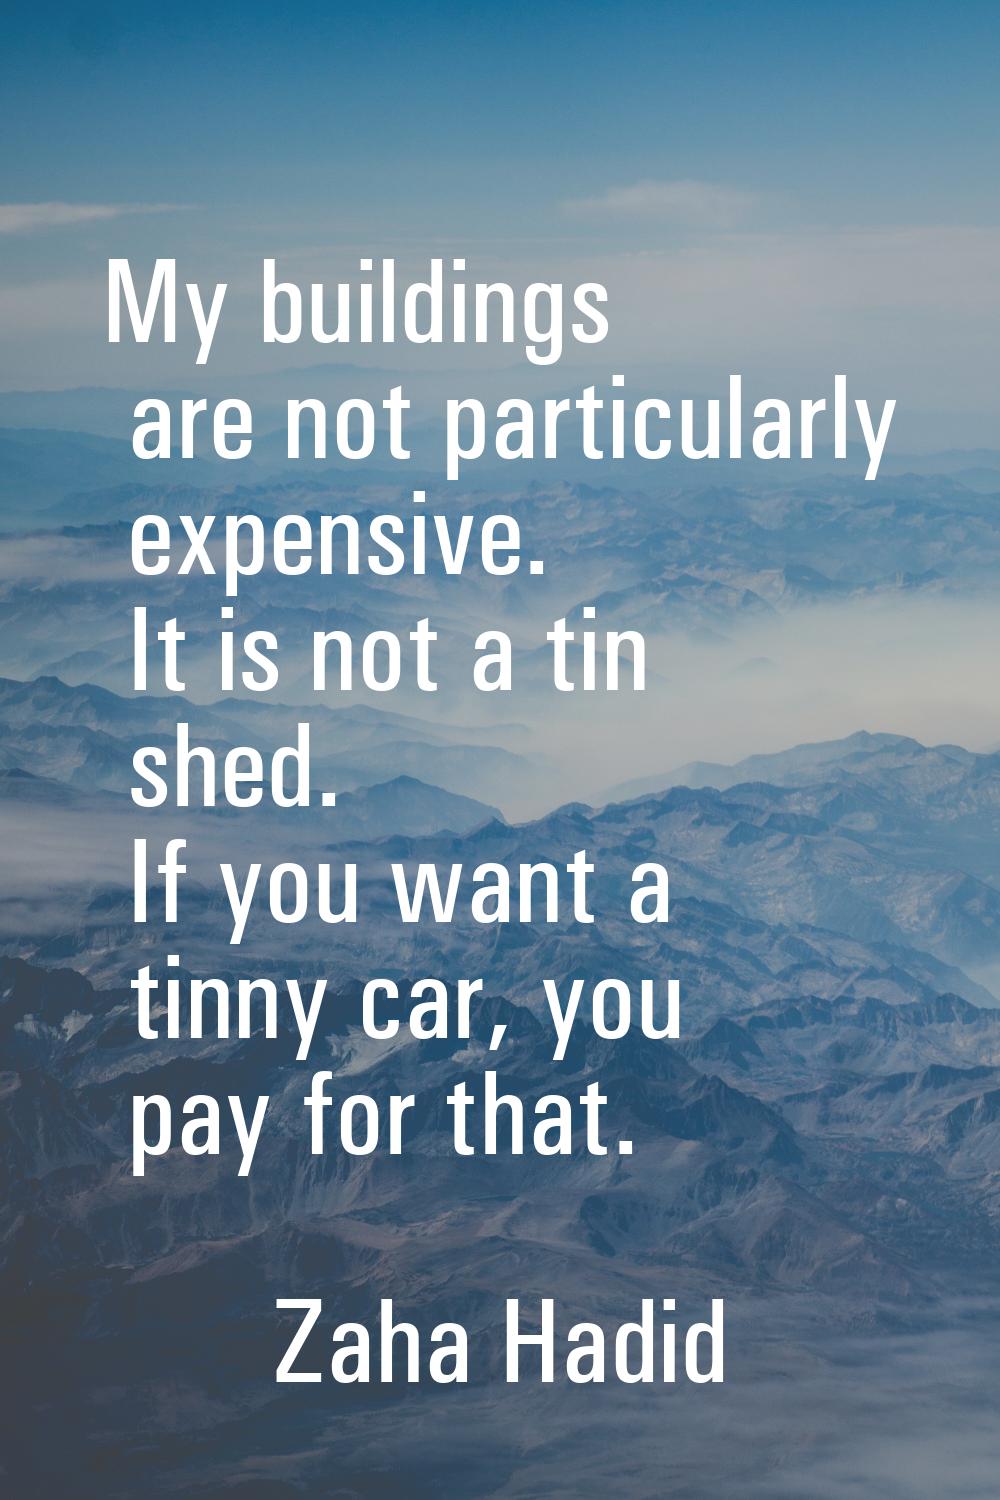 My buildings are not particularly expensive. It is not a tin shed. If you want a tinny car, you pay